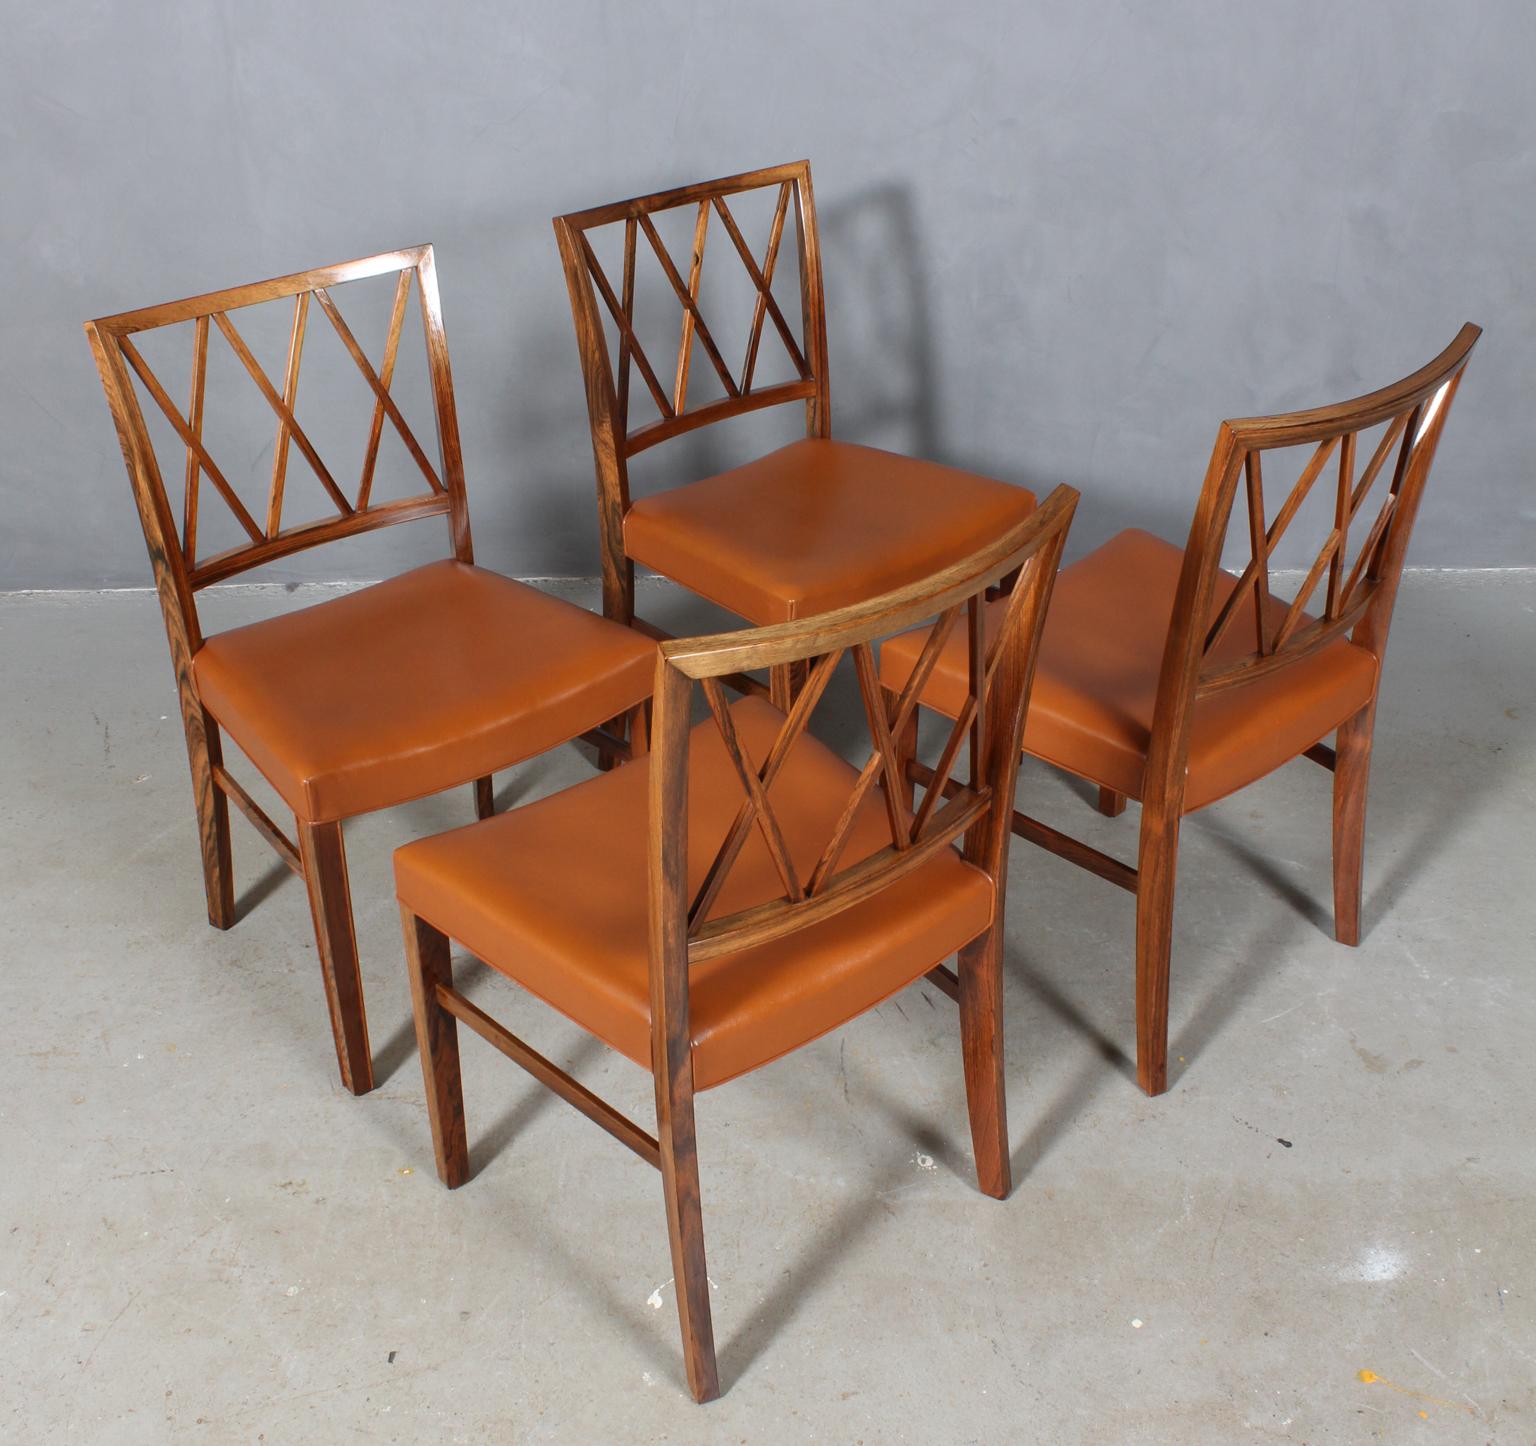 Ole Wanscher set of four dining chairs, upholstered with light patinated cognac aniline leather.

Made of rosewood, profilated legs.

Made of A. J. Iversen.